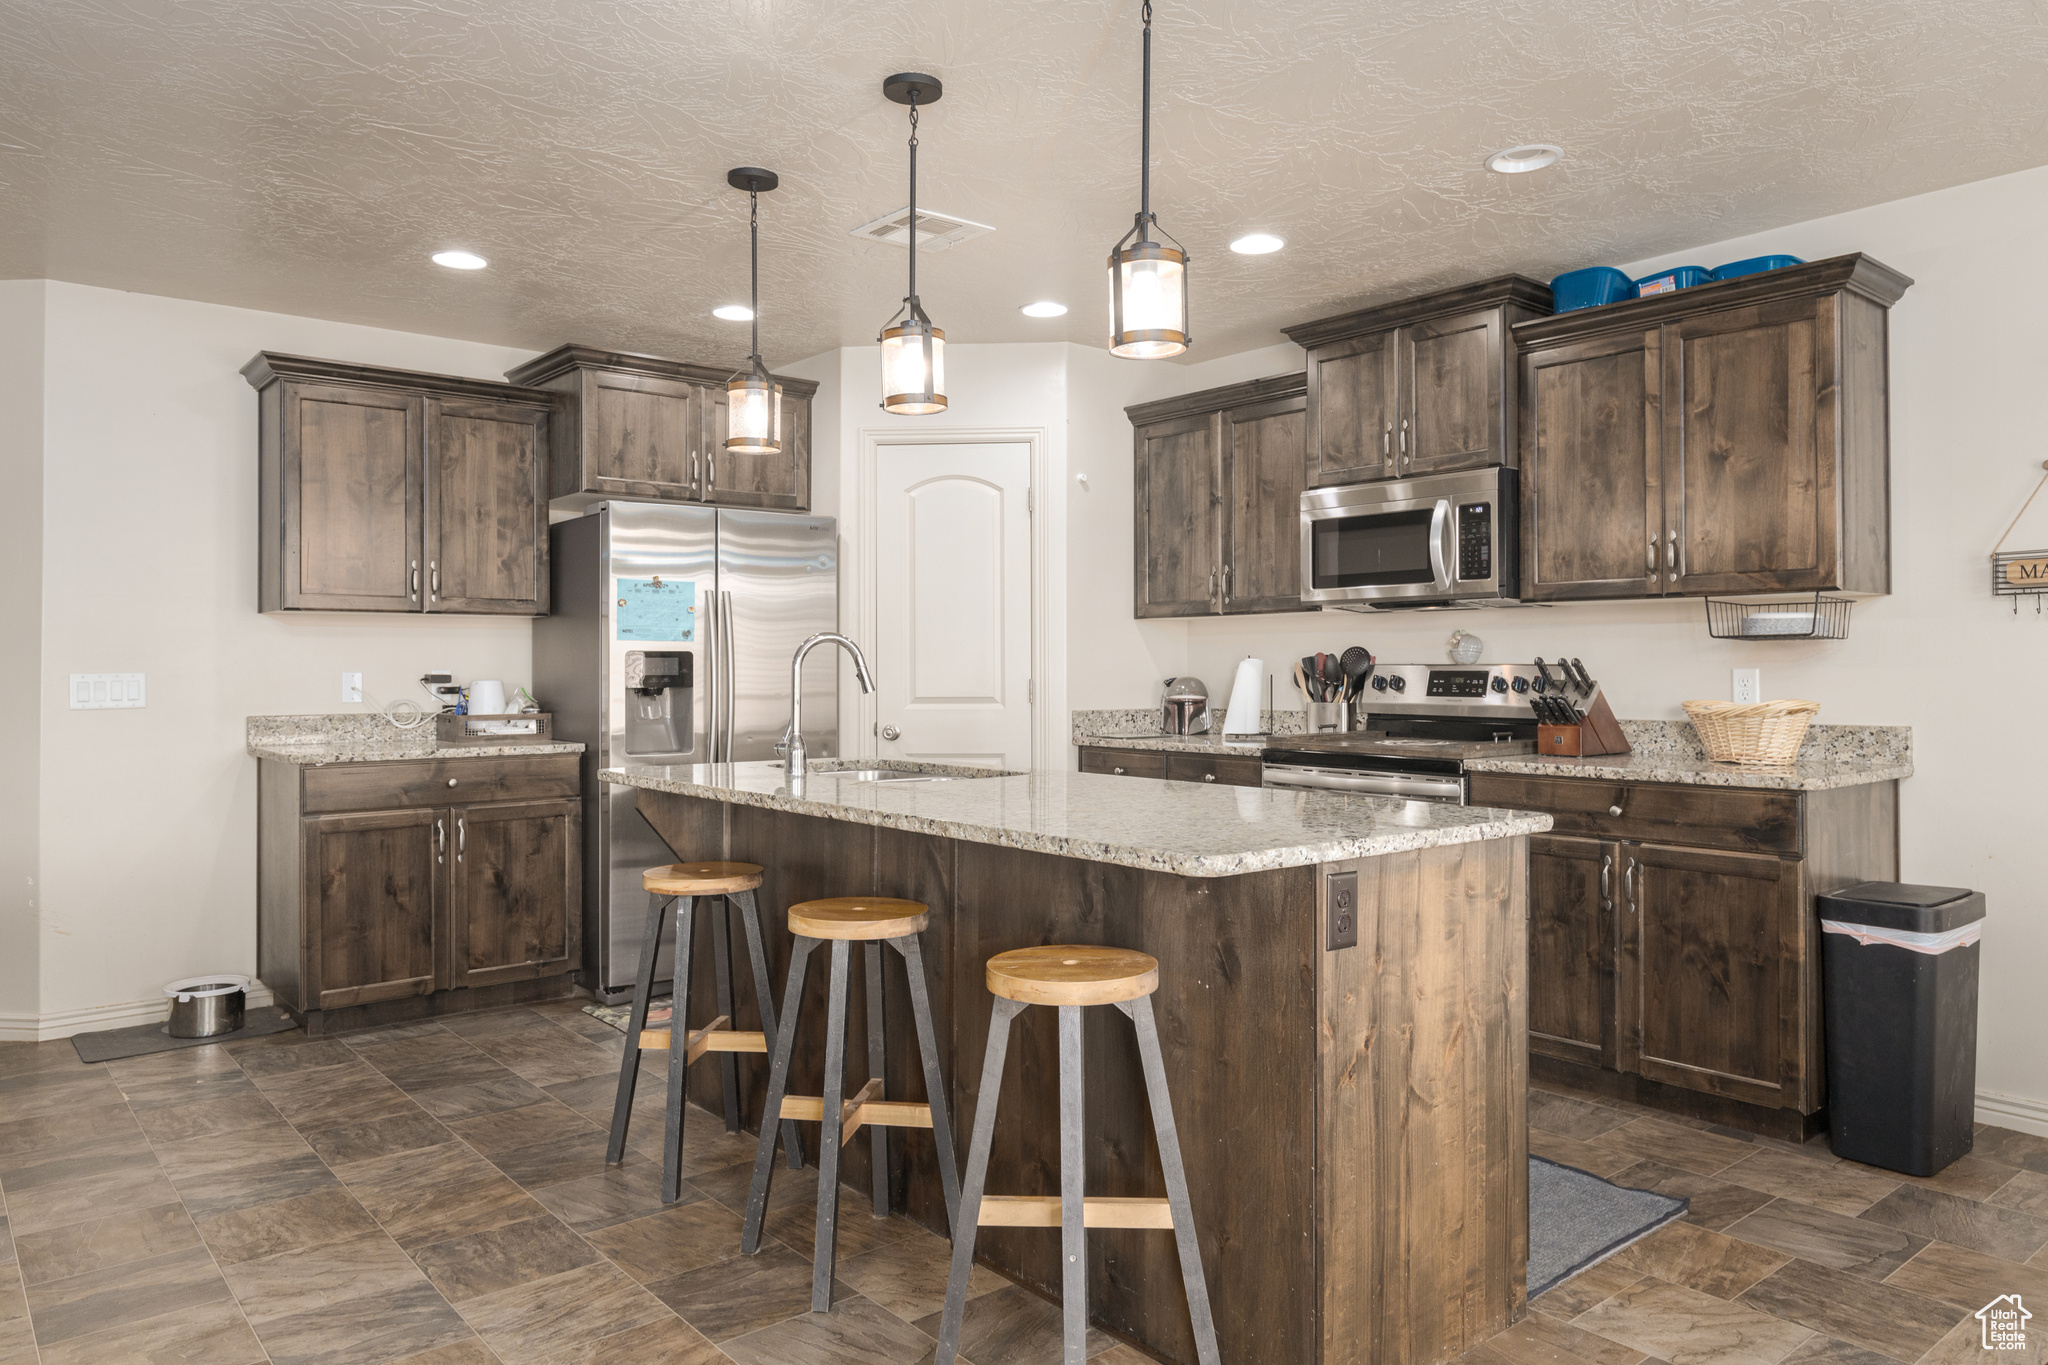 Kitchen featuring dark brown cabinetry, appliances with stainless steel finishes, sink, decorative light fixtures, and a kitchen island with sink